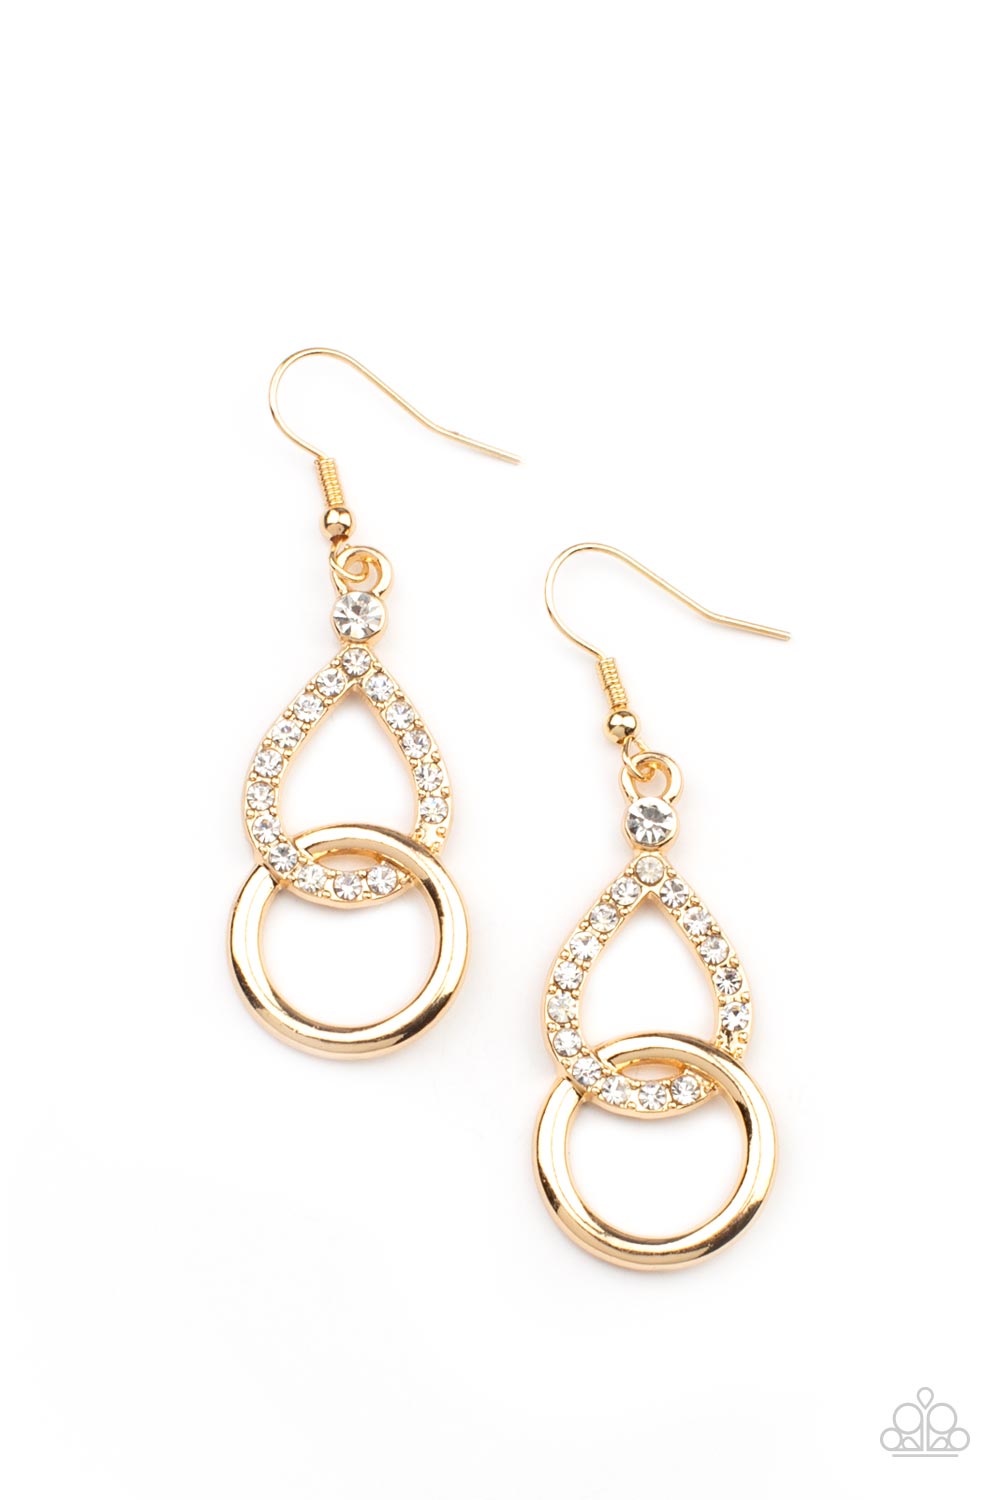 Red Carpet Couture - Gold Earrings - Paparazzi Accessories